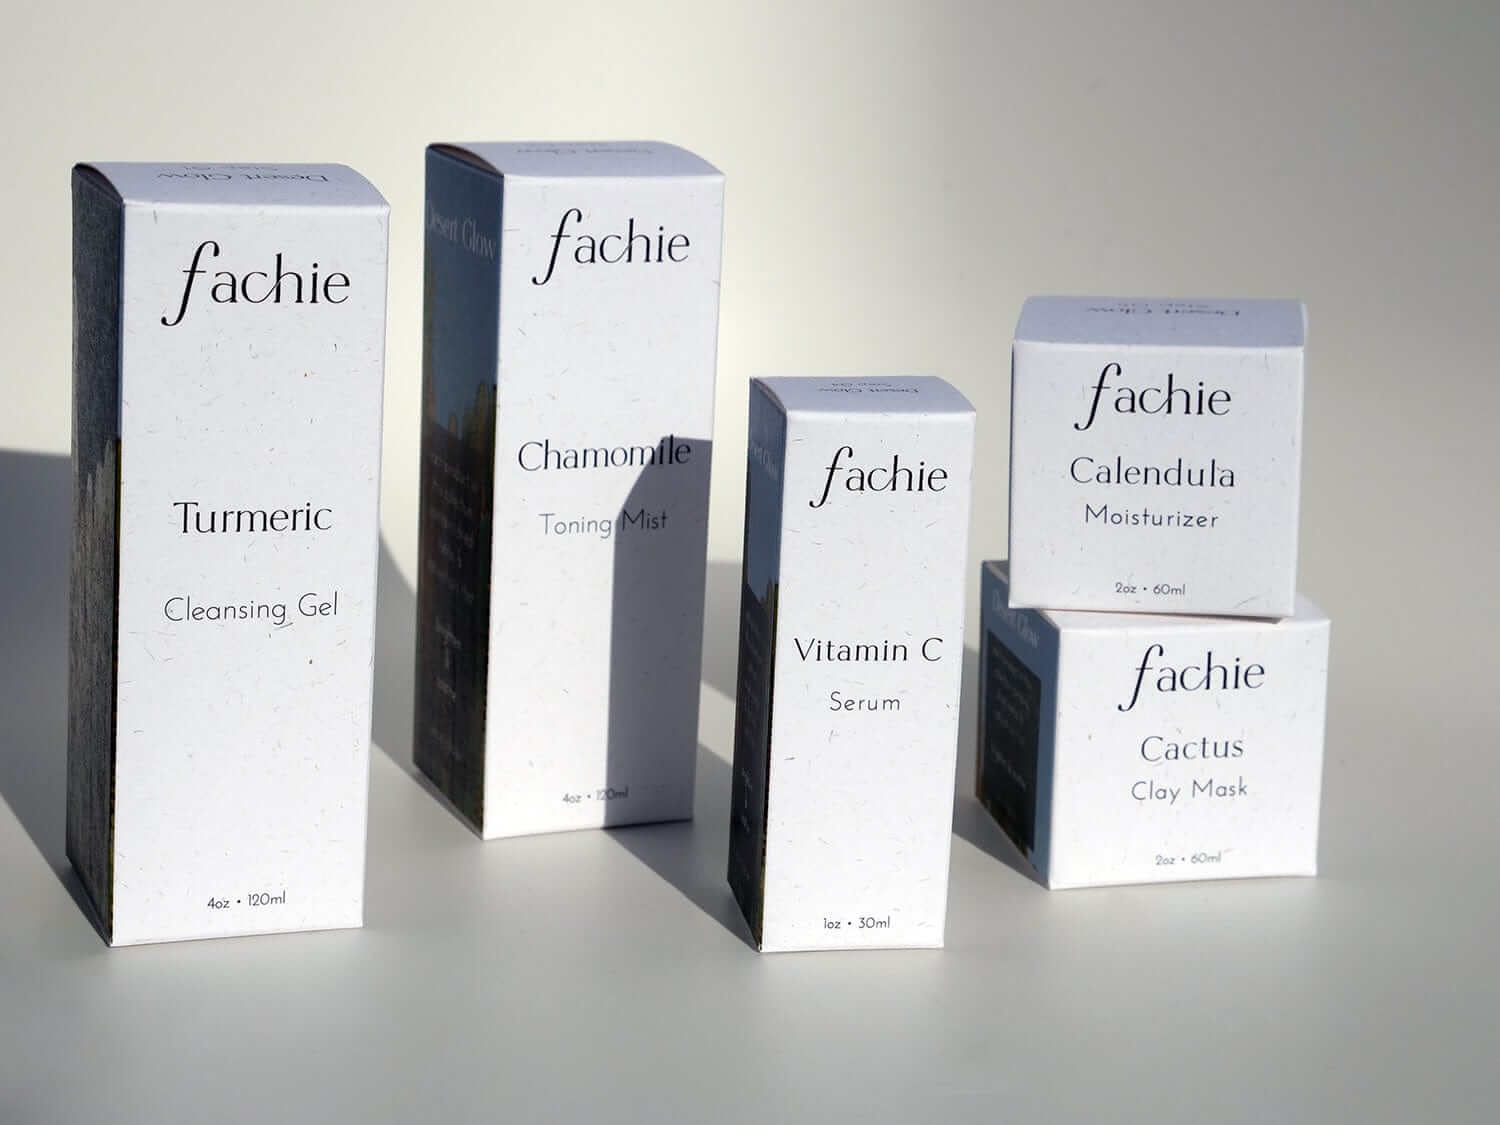  Soothing Routine - Desert Collection by Fachie Beauty